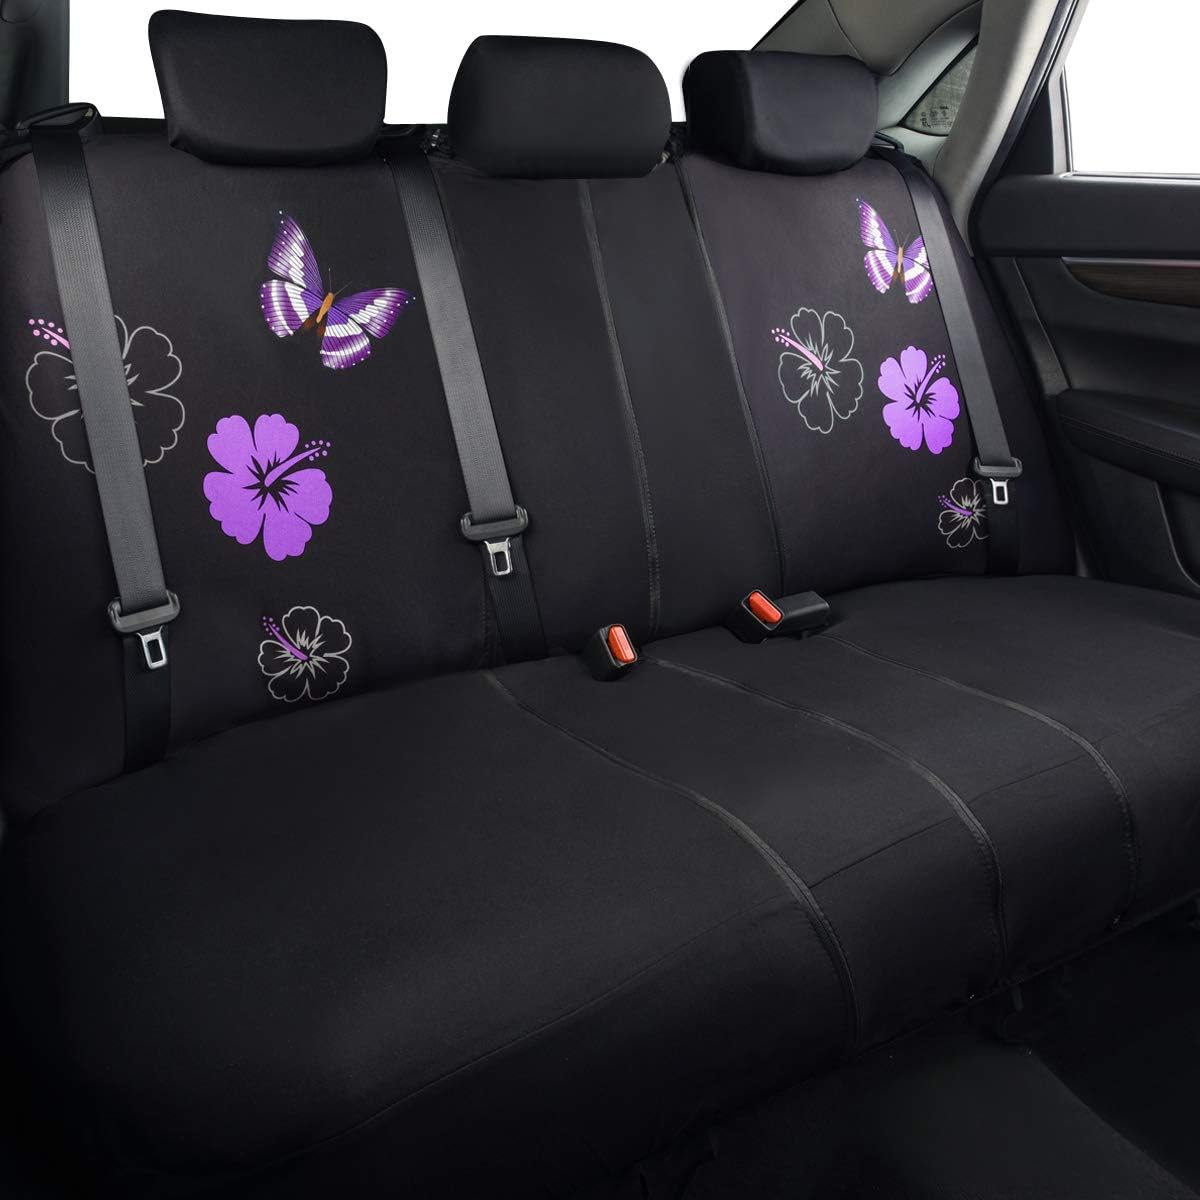 CAR PASS Universal Butterfly and Flower Car Floor Mats,Car Seat Cover and Pretty Butterfly Steering Wheel Cover, for Cute Women Girly, Fit for 95% Suvs,Trucks,Sedans,Vans